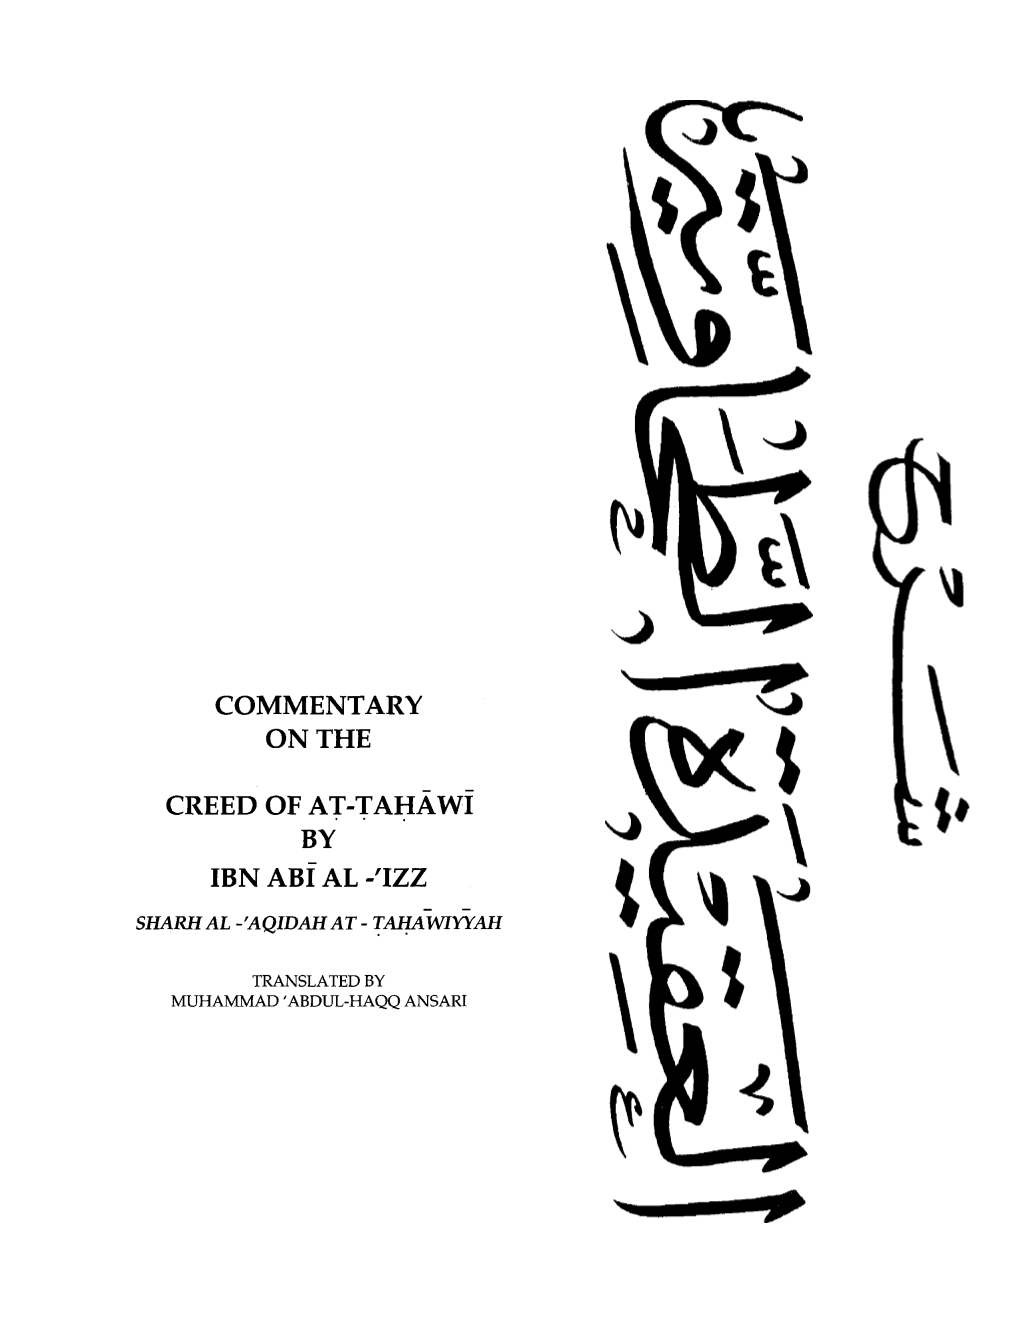 COMMENTARY on the CREED of AT-Tahawf by IBN ABIAL -'IZZ